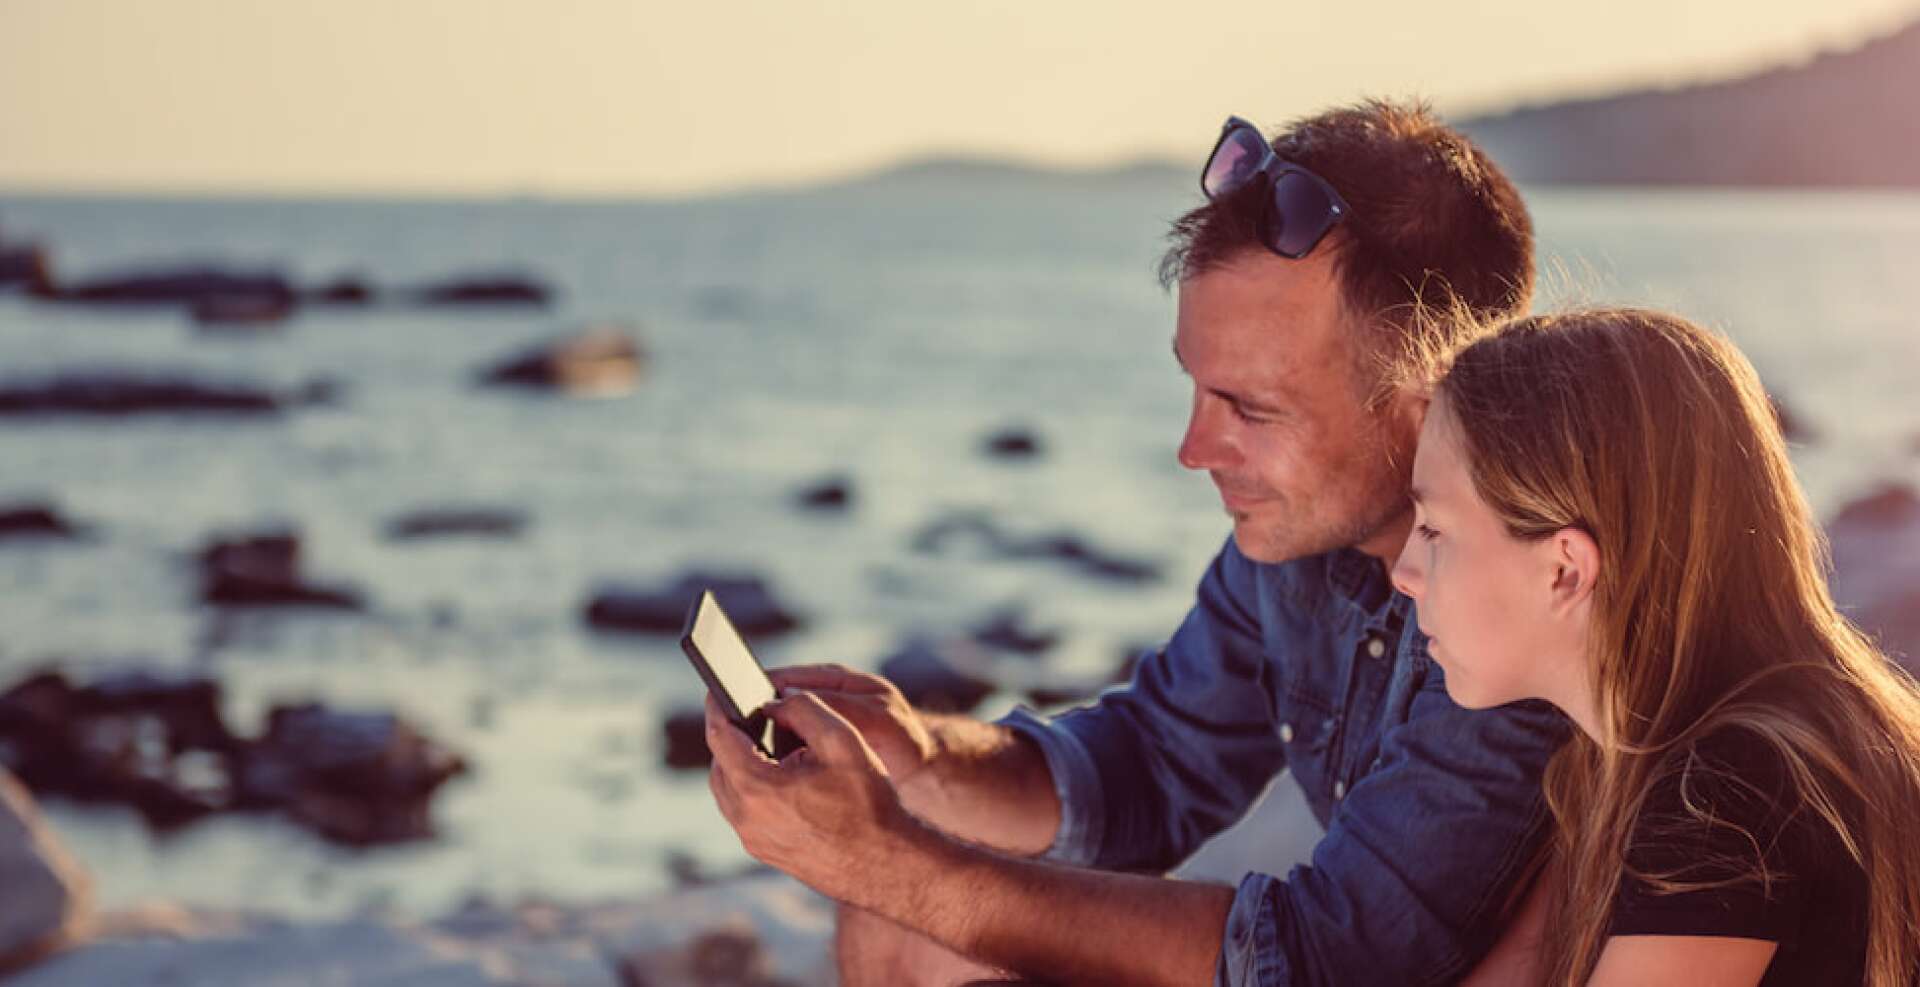 Texting and Vacationing Can Safely Mix